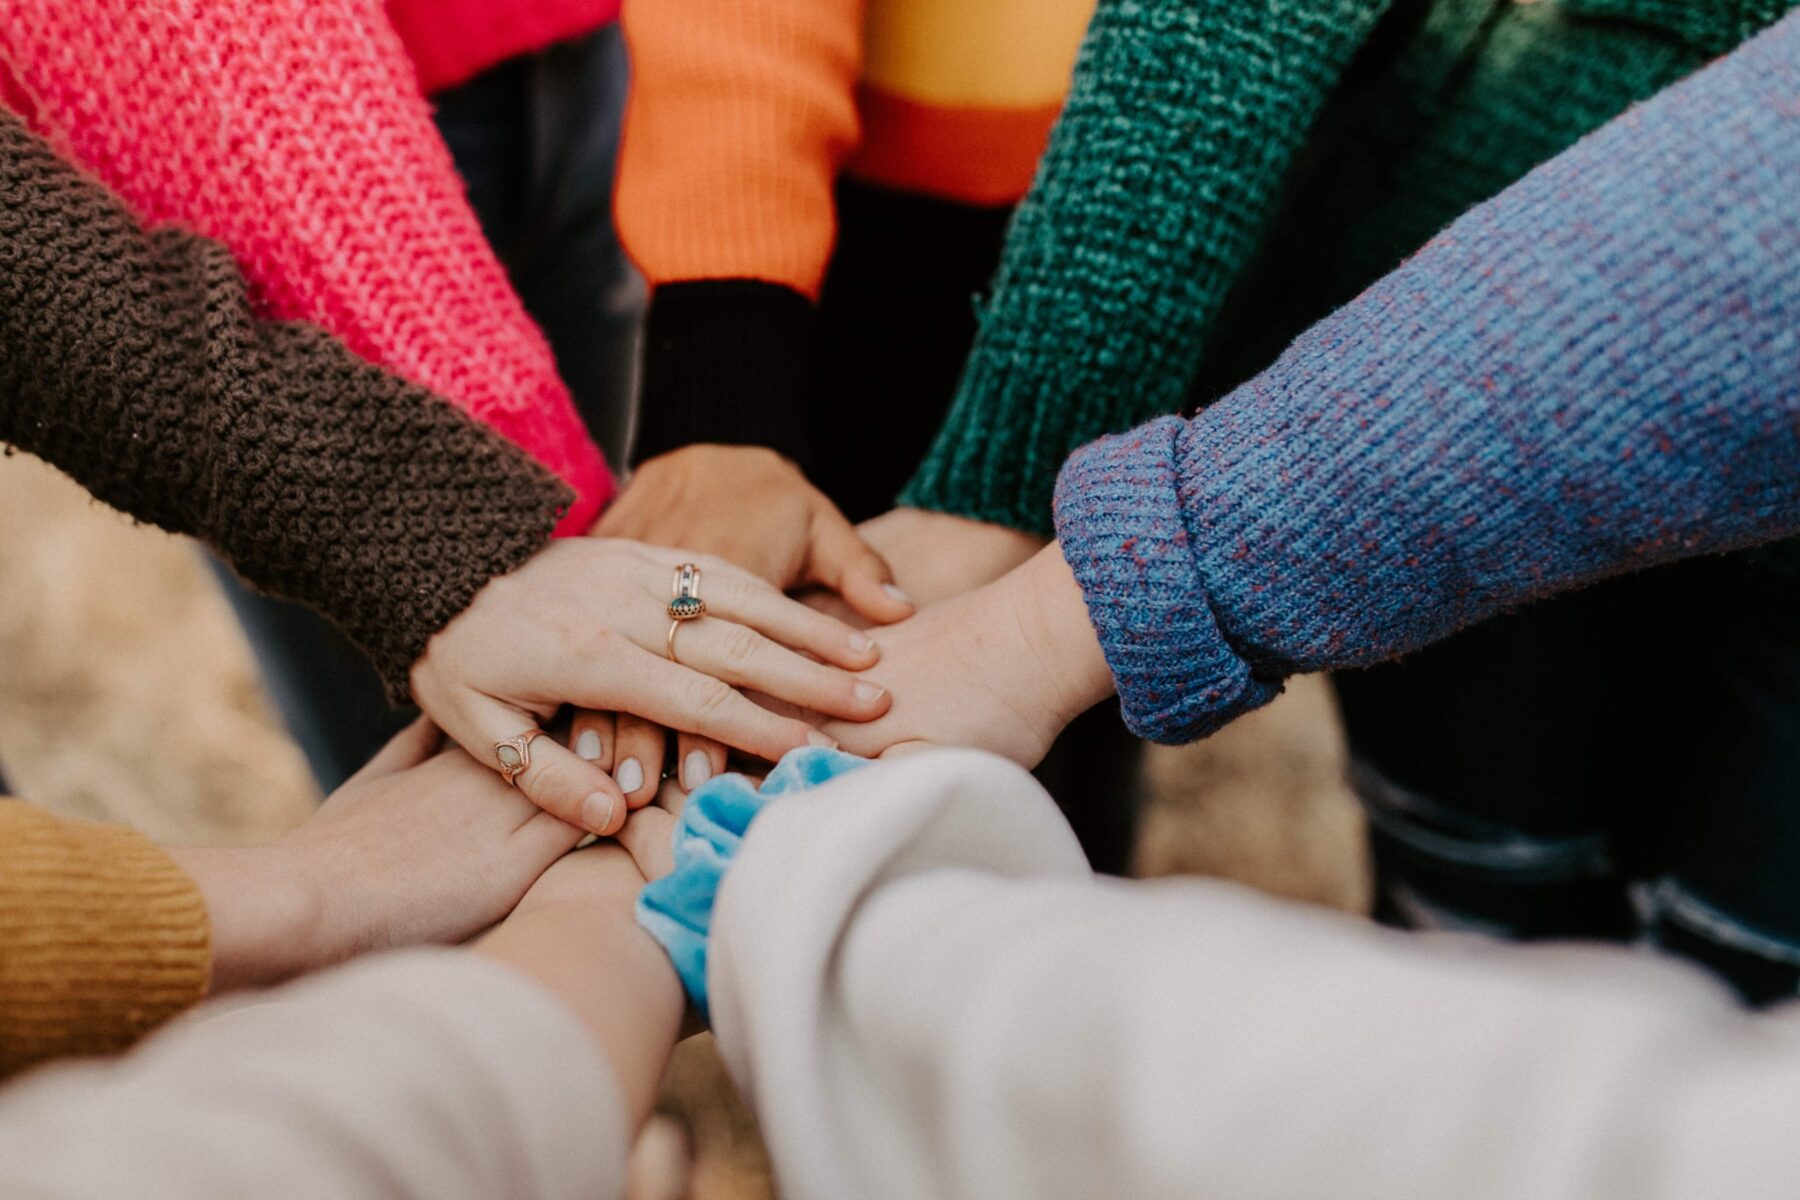 Group of people placing their hands together in a circle